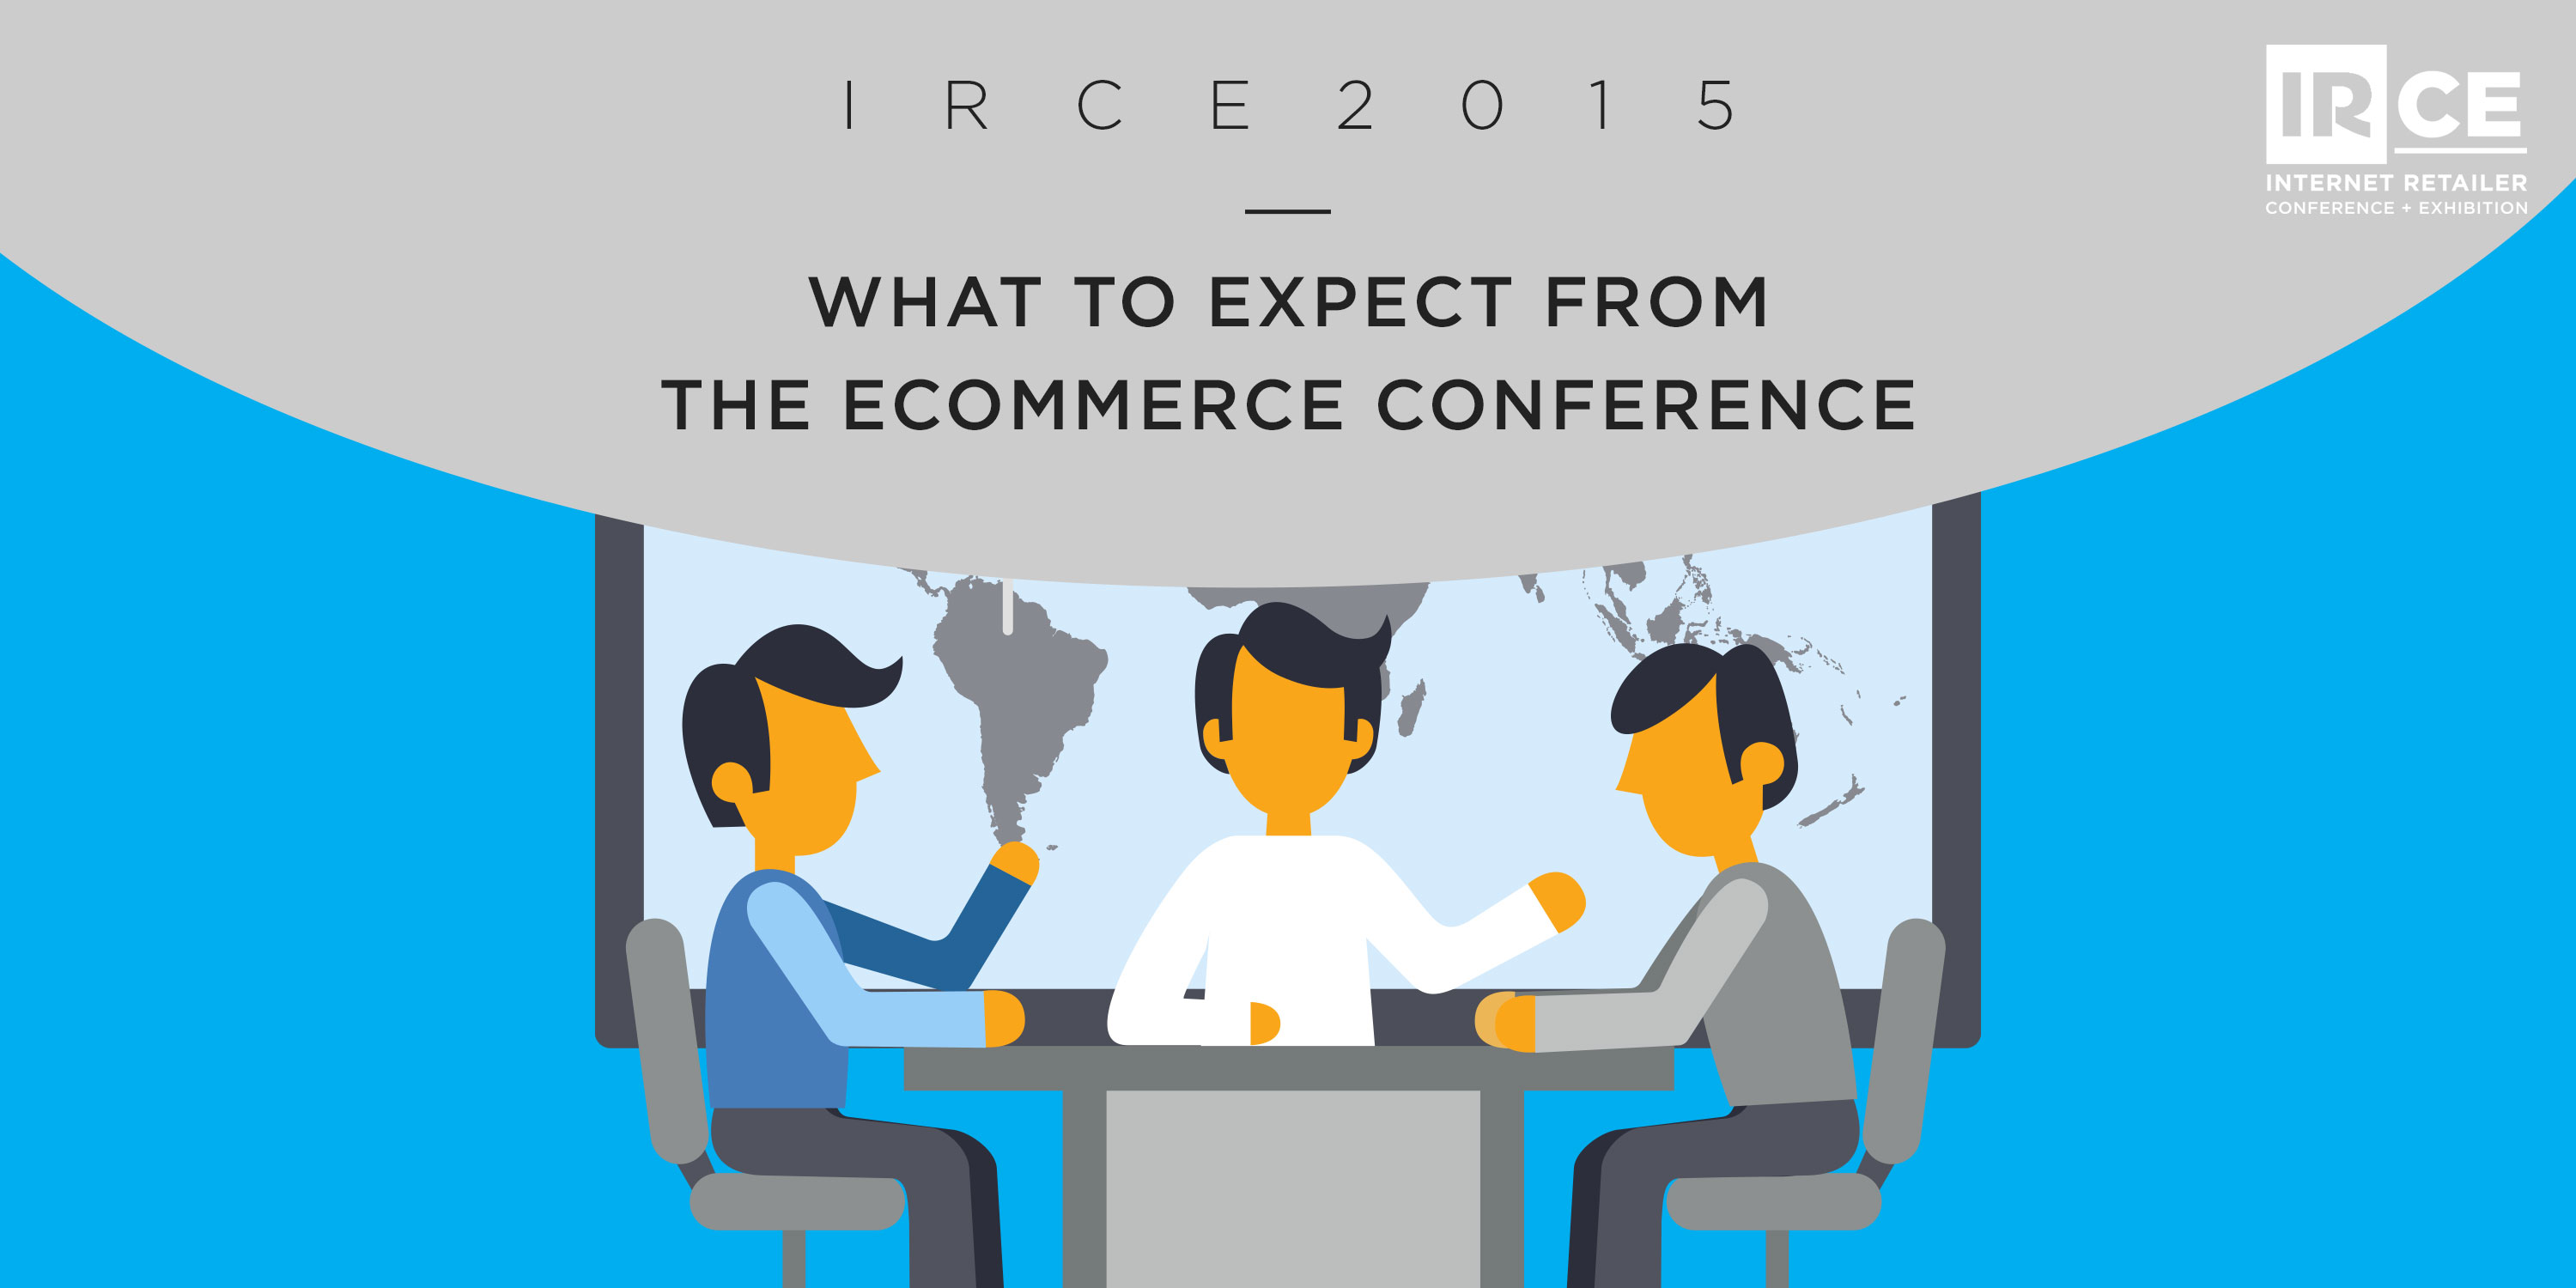 IRCE 2015: What to Expect from the Ecommerce Conference